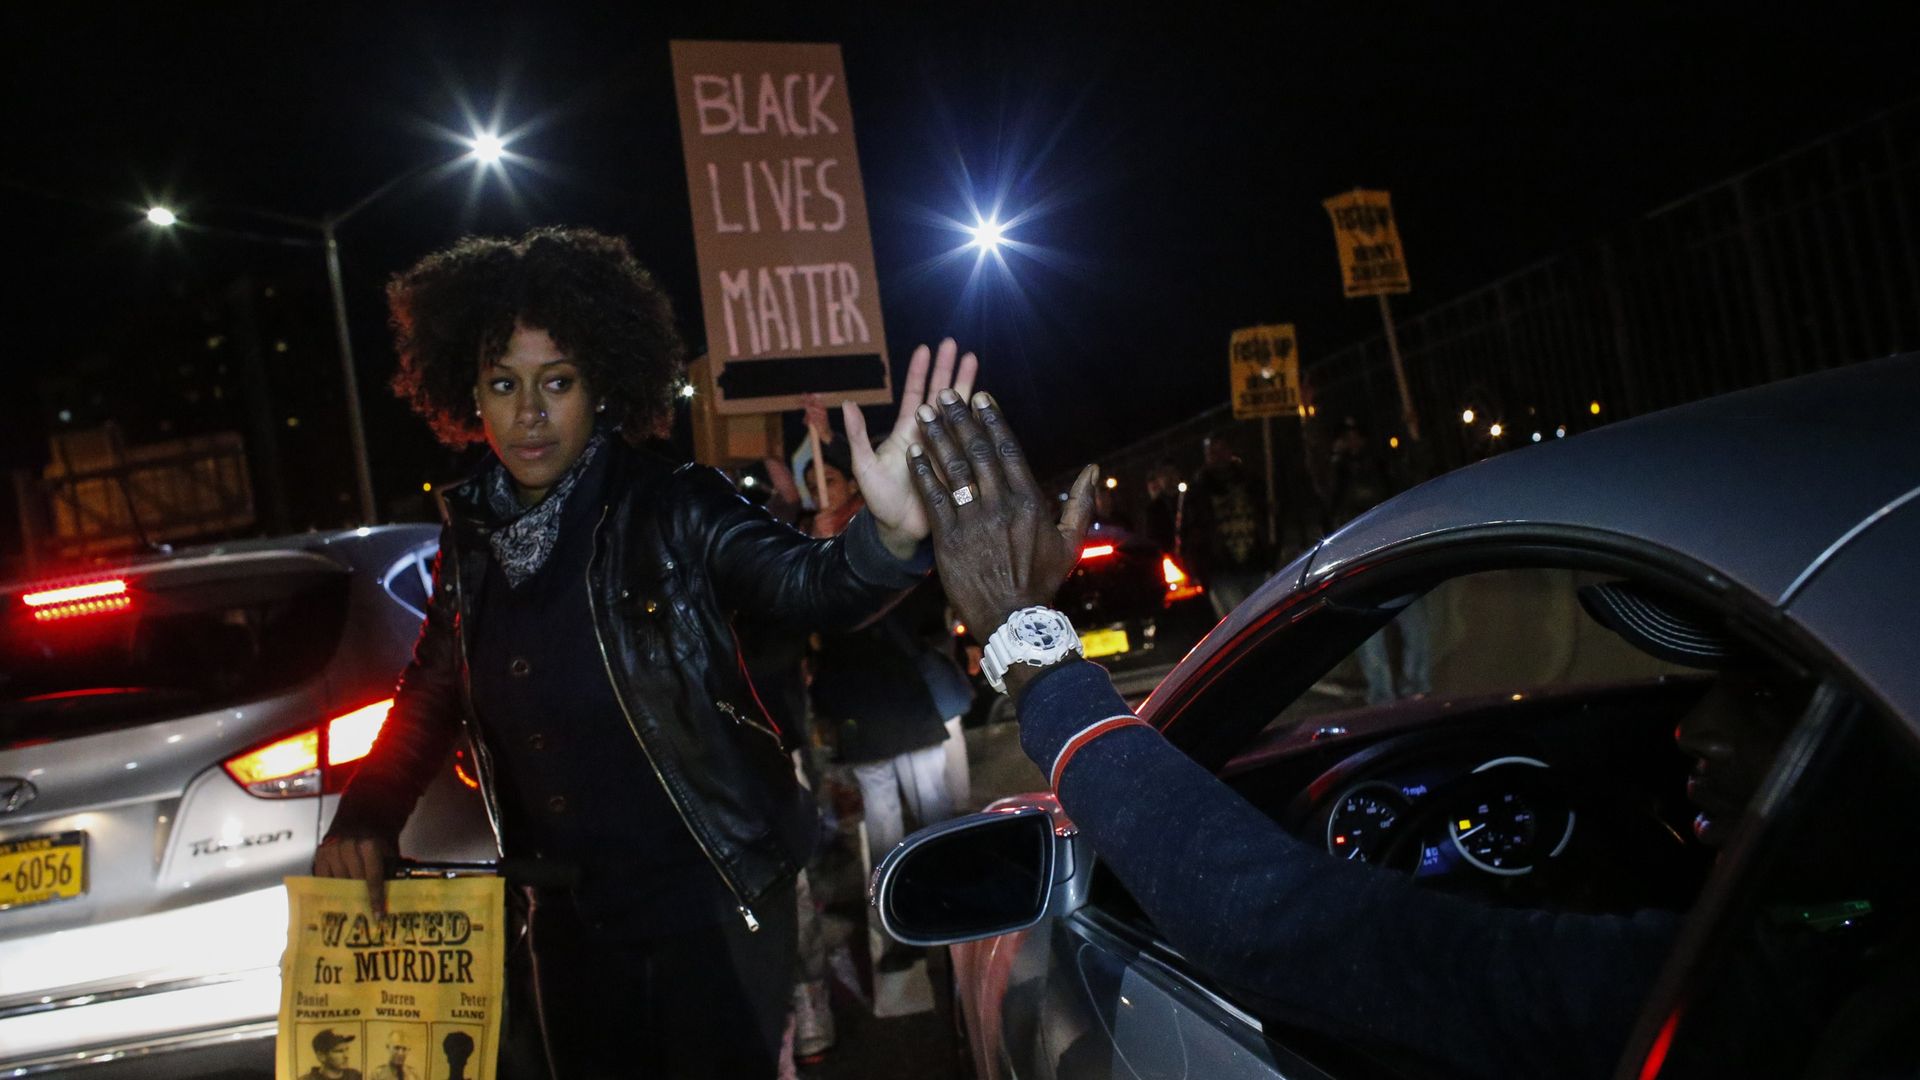 A driver shakes hands with a demonstrator during a protest march in New York City after a grand jury declined to prosecute a white police officer for the killing Michael Brown.